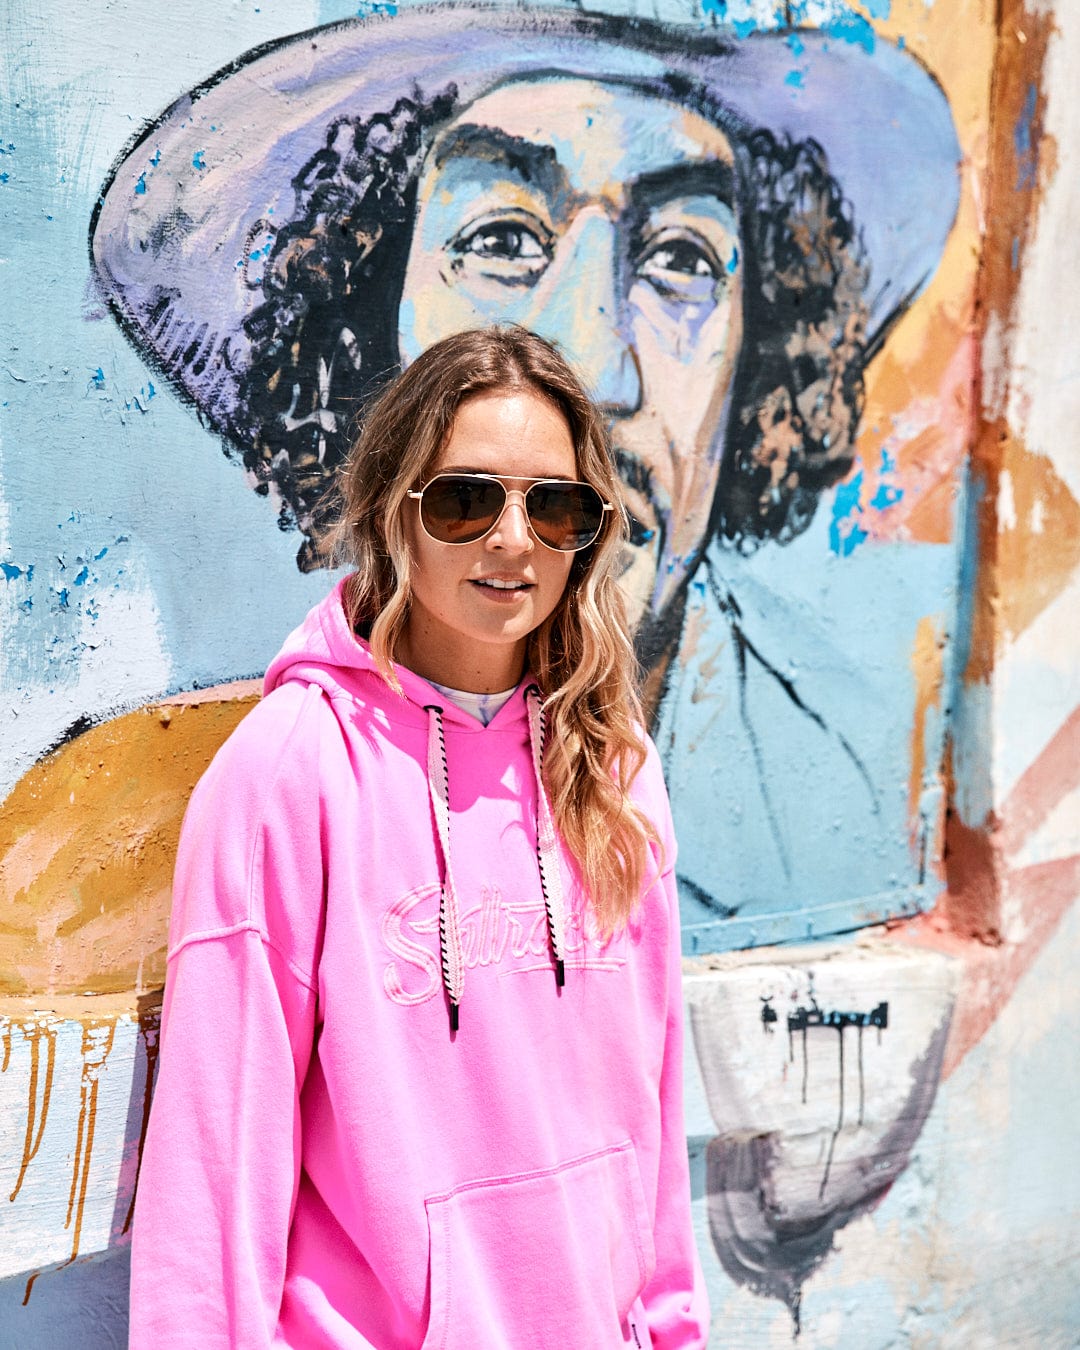 A person wearing a Saltrock branded Instow - Womens Pop Hoodie - Pink and sunglasses stands in front of a colorful mural featuring a person with curly hair and a hat.